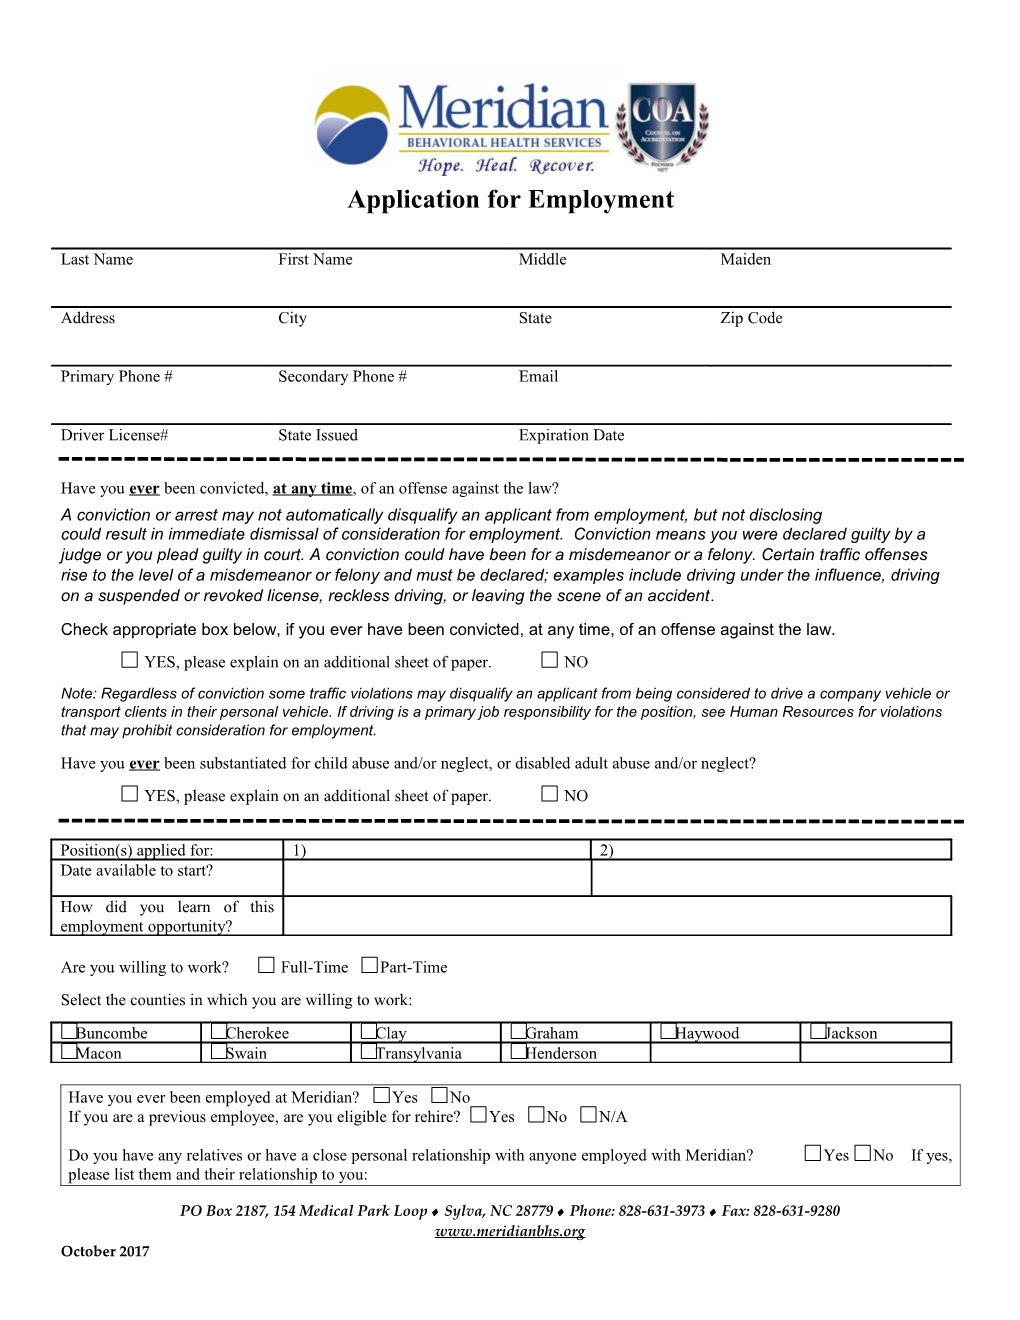 Application for Employment s33